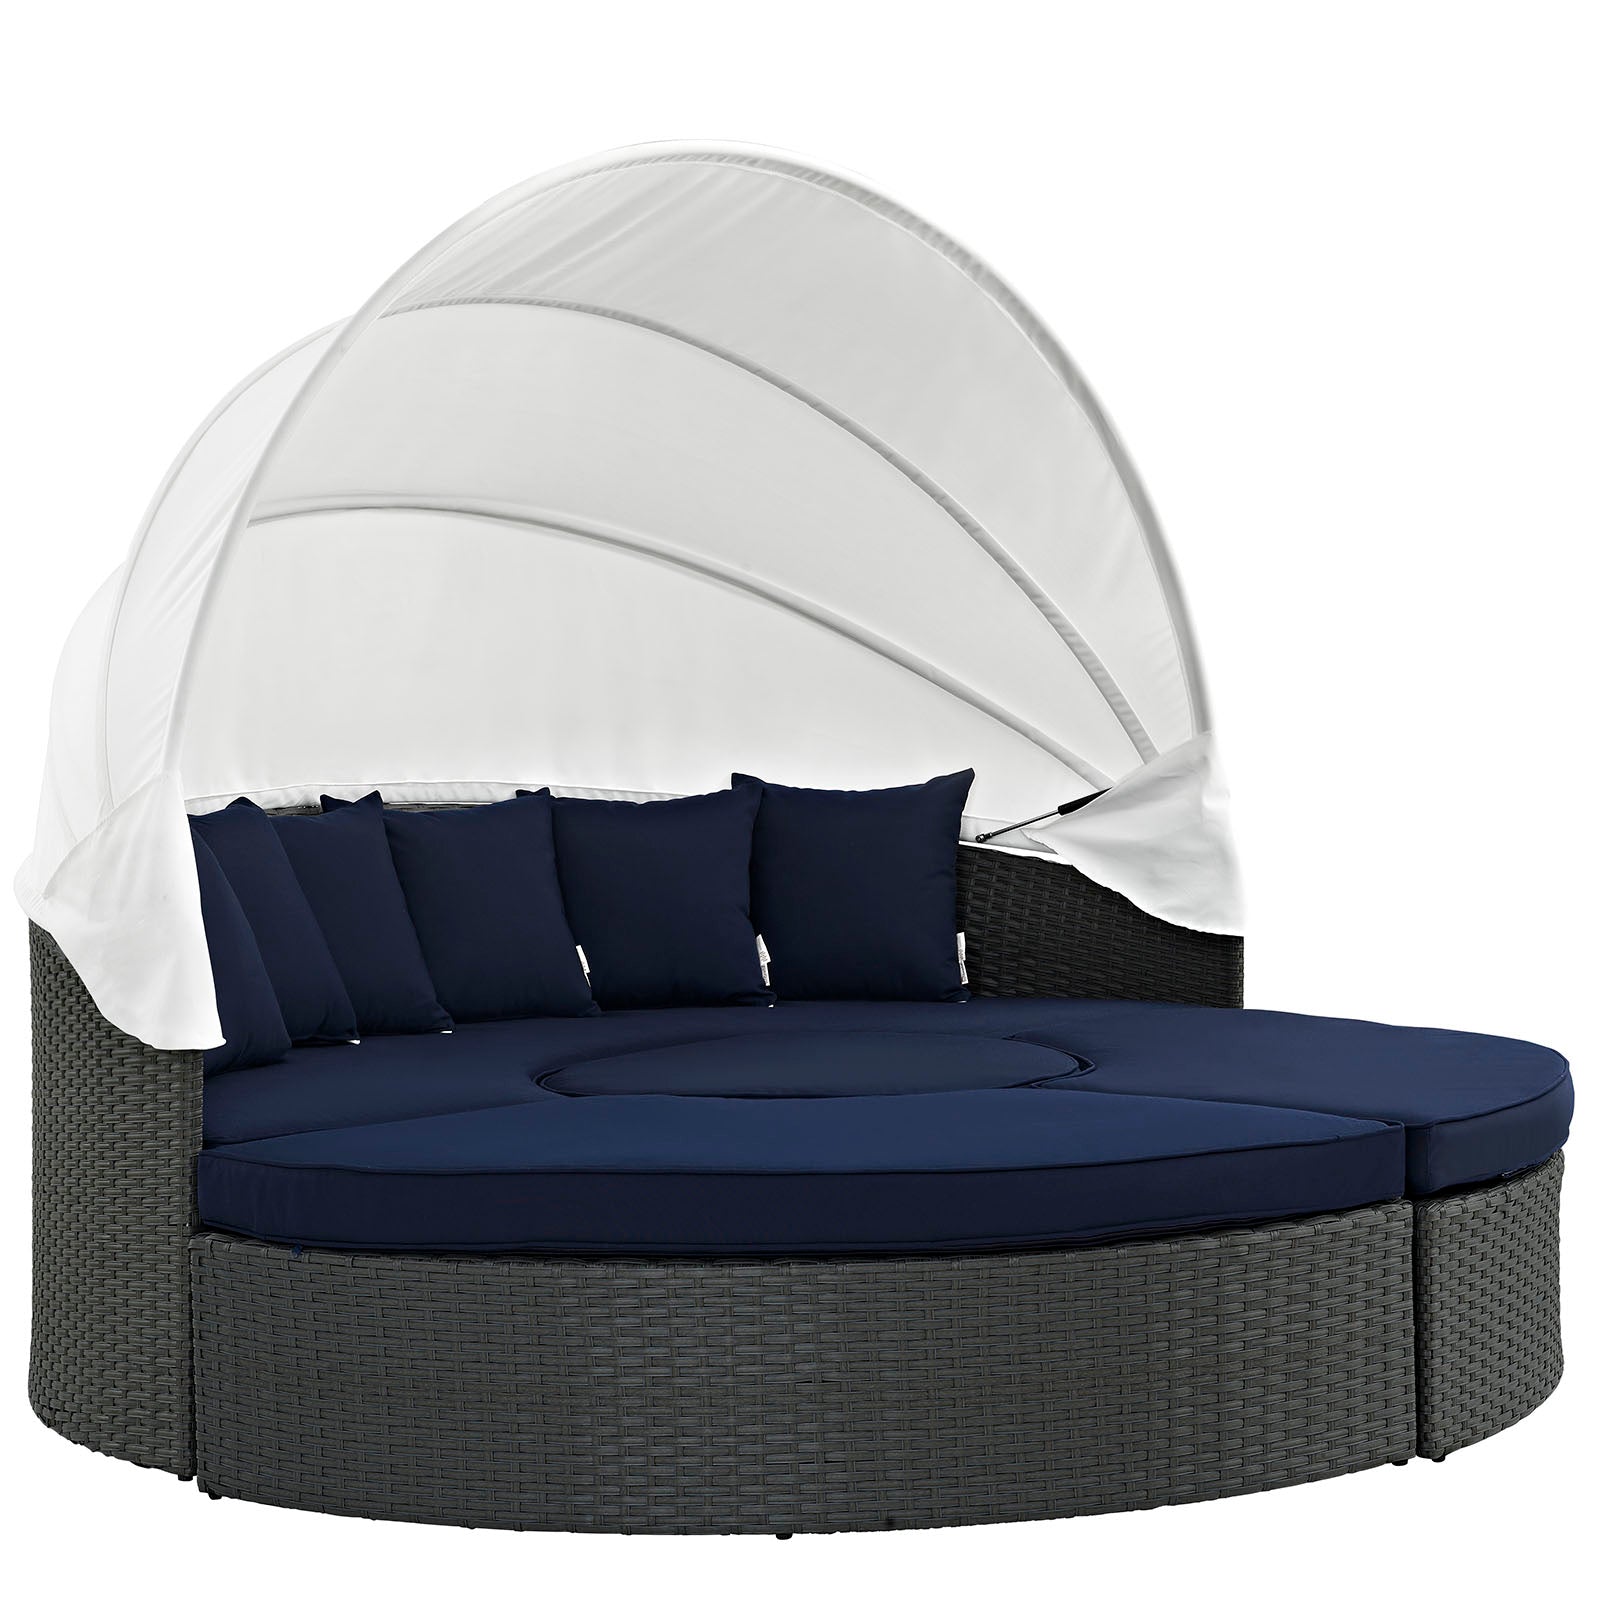 Modway - Sojourn Outdoor Patio Sunbrella® Daybed - EEI-1986